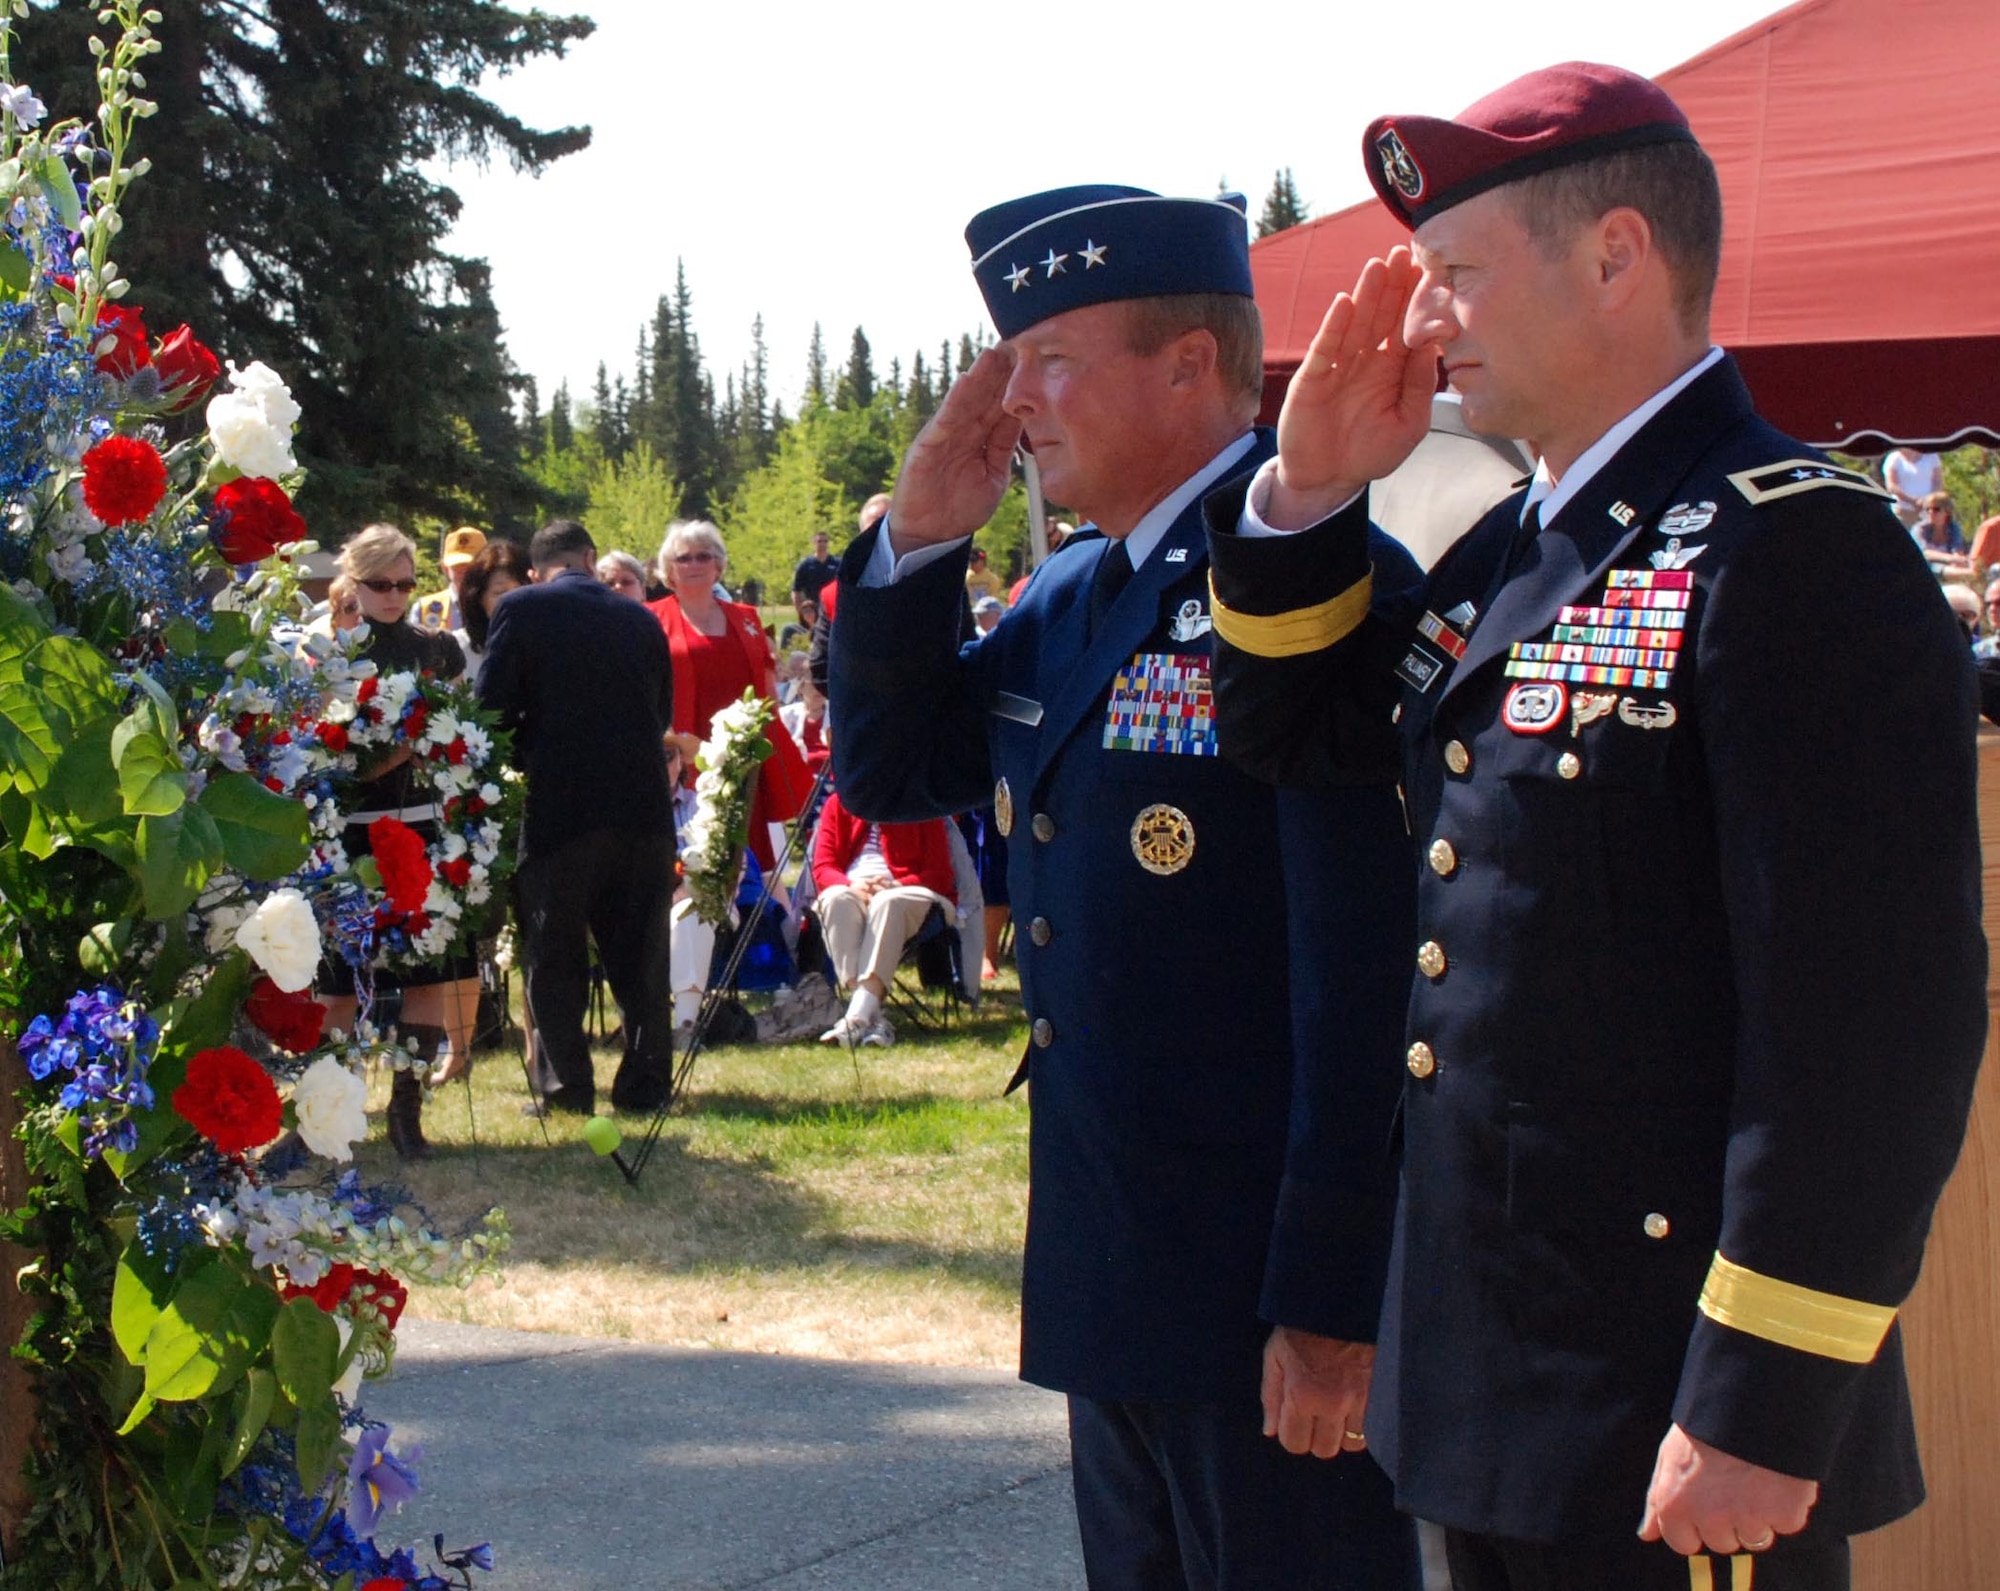 Alaskan Command Commander Air Force Lt. Gen. Dana Atkins and U.S. Army Alaska Commanding General Army Maj. Gen. Raymond Palumbo salute following the presentation of a wreath, Monday, at the Fort Richardson National Cemetery Memorial Day ceremony. (Photo by Mary Rall/USARAK PA)
